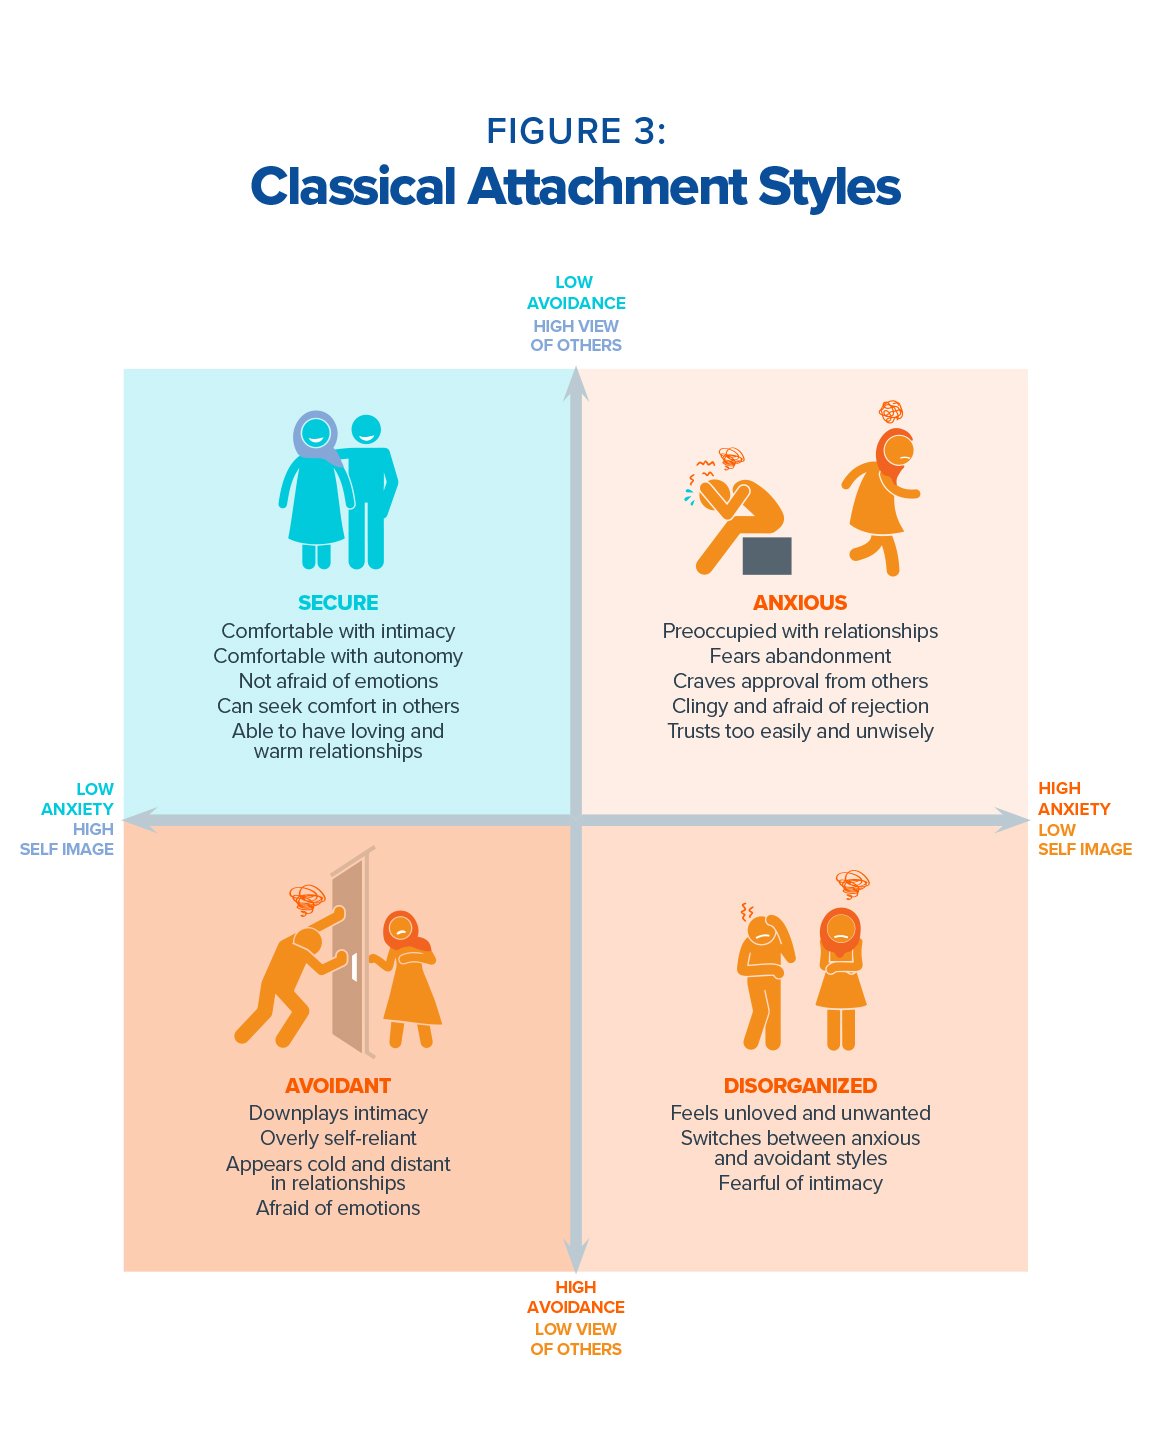 Classical attachment styles